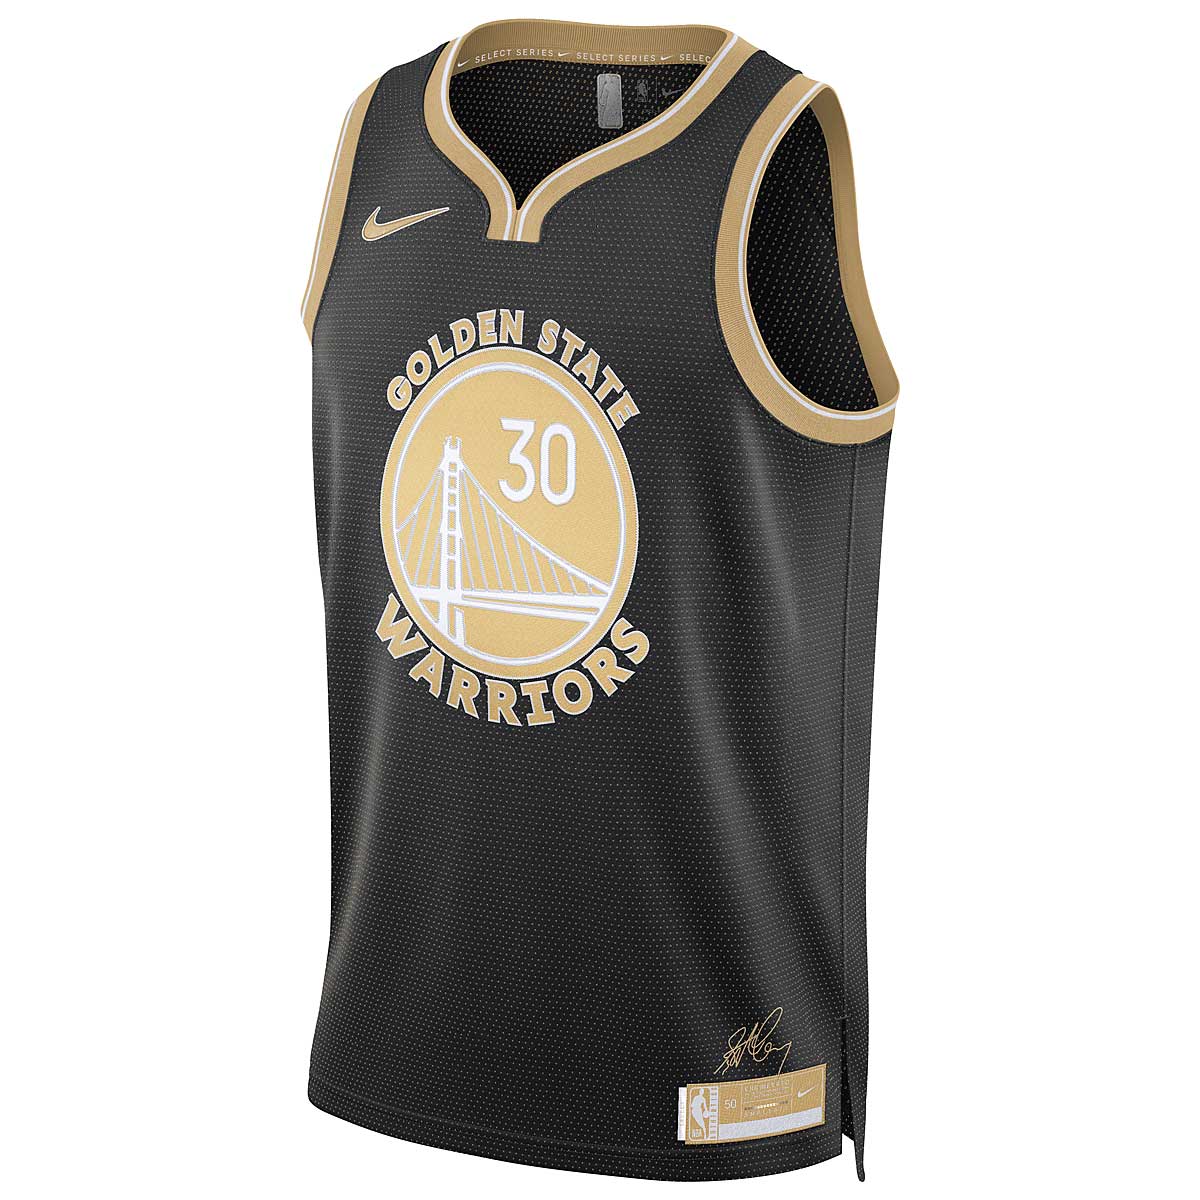 Image of Nike NBA Golden State Warriors Dri-fit Select Series Swingman Jersey Stephen Curry, Black/club Gold